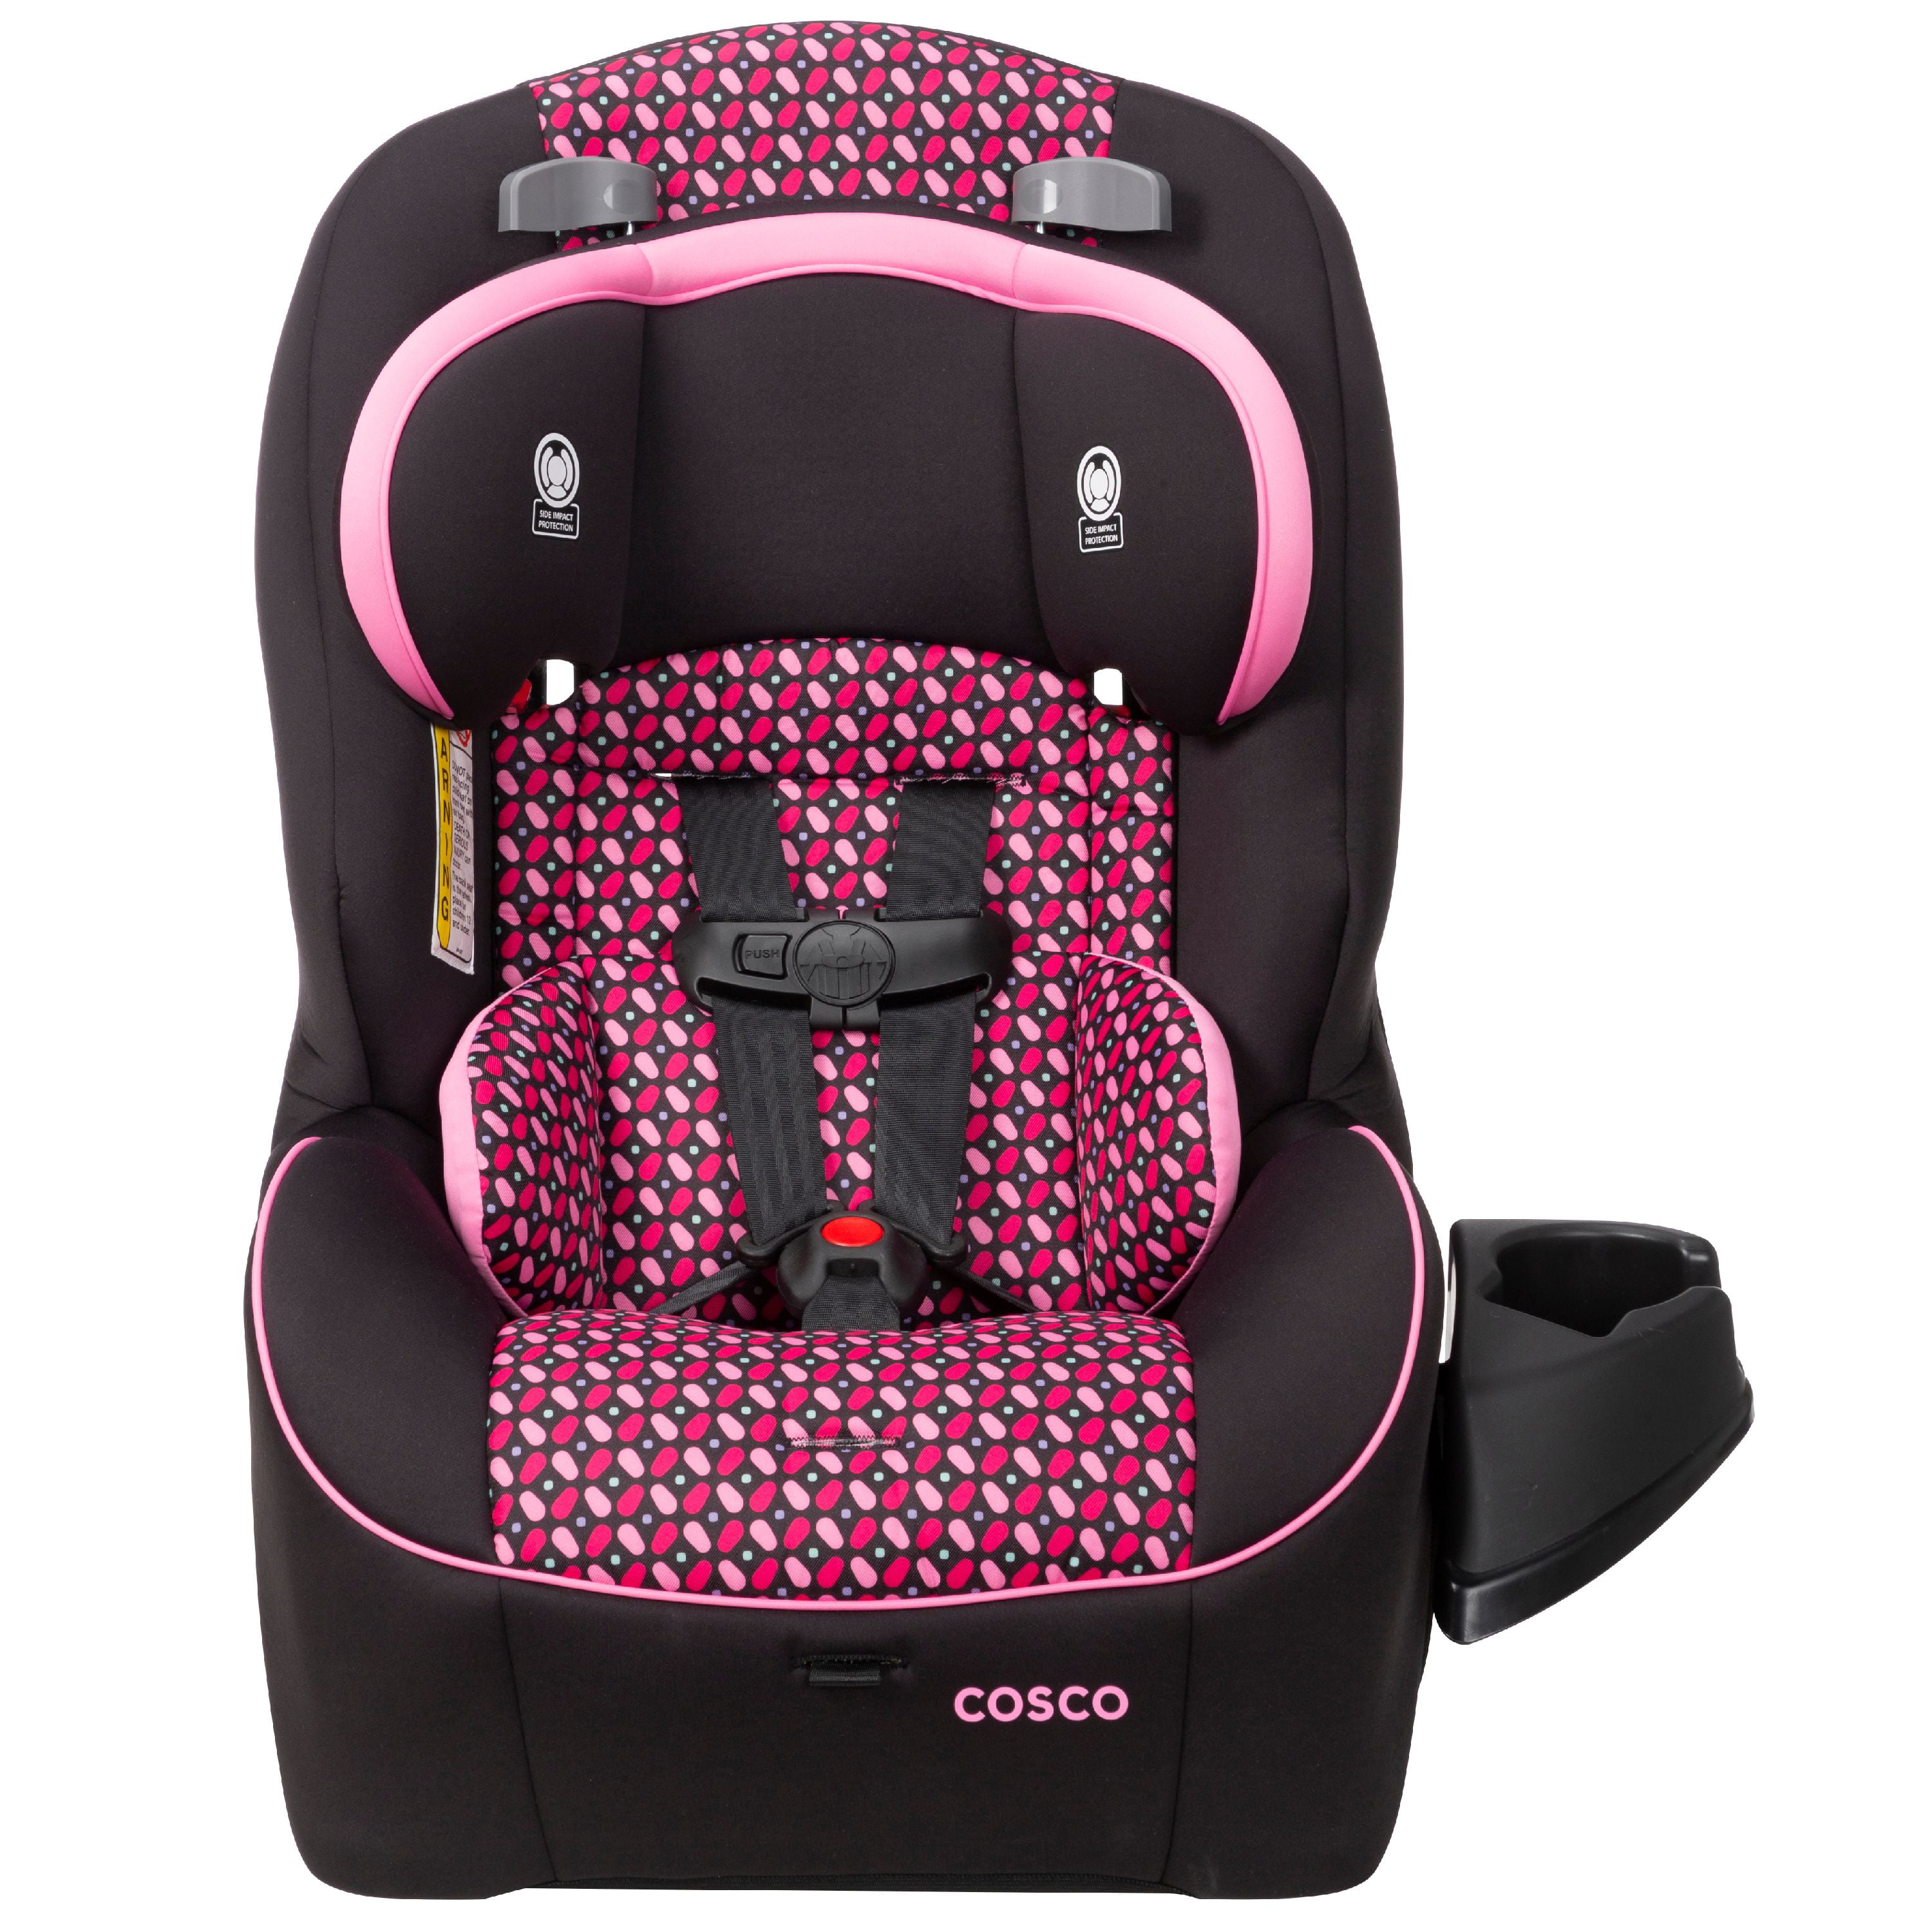 walmart-convertible-car-seat-a-comprehensive-review-and-buyer-s-guide